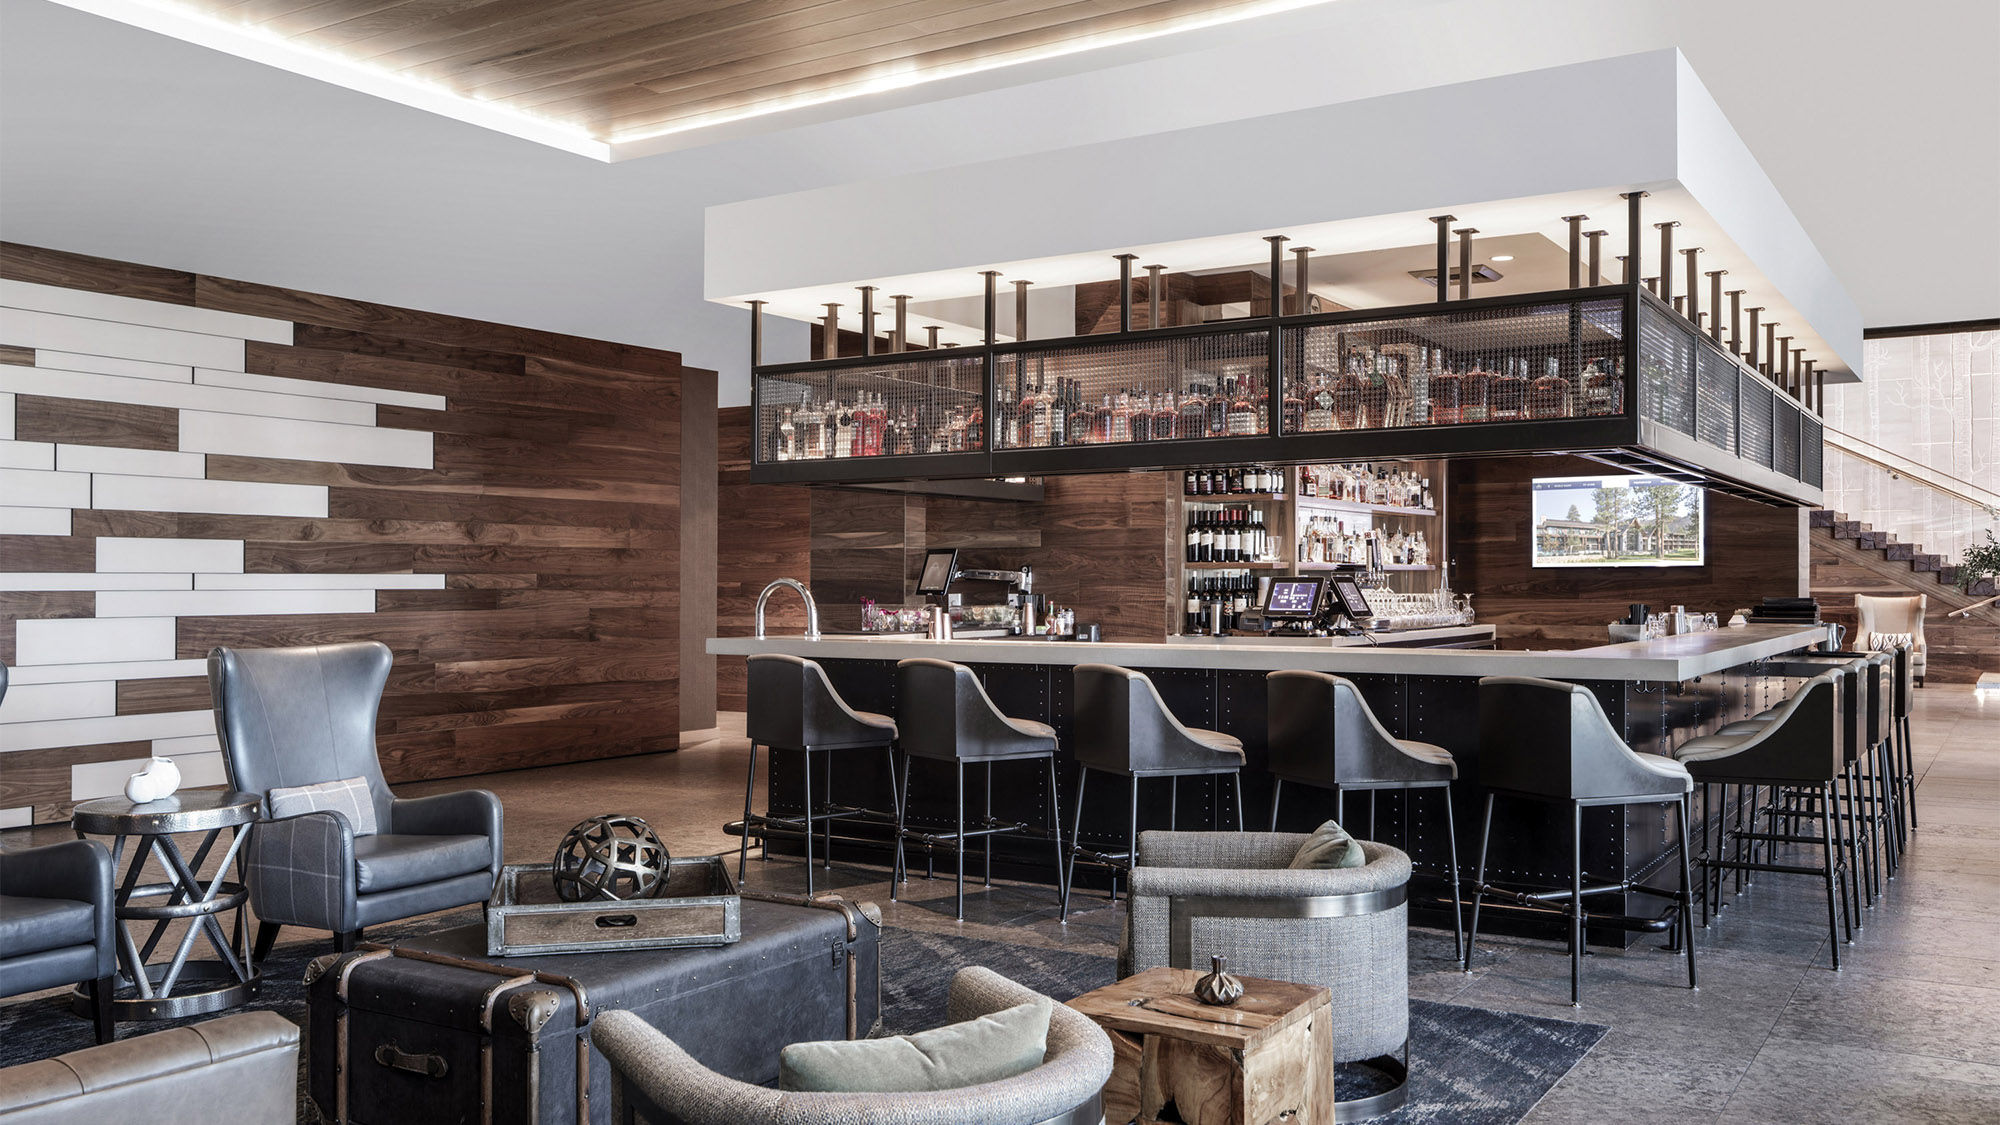 The Bistro Bar at the Edgewood Tahoe. On DIY Fridays, one of the resort's bars will offer a lesson, such as how to make sangria, bath salts or sugar scrubs.